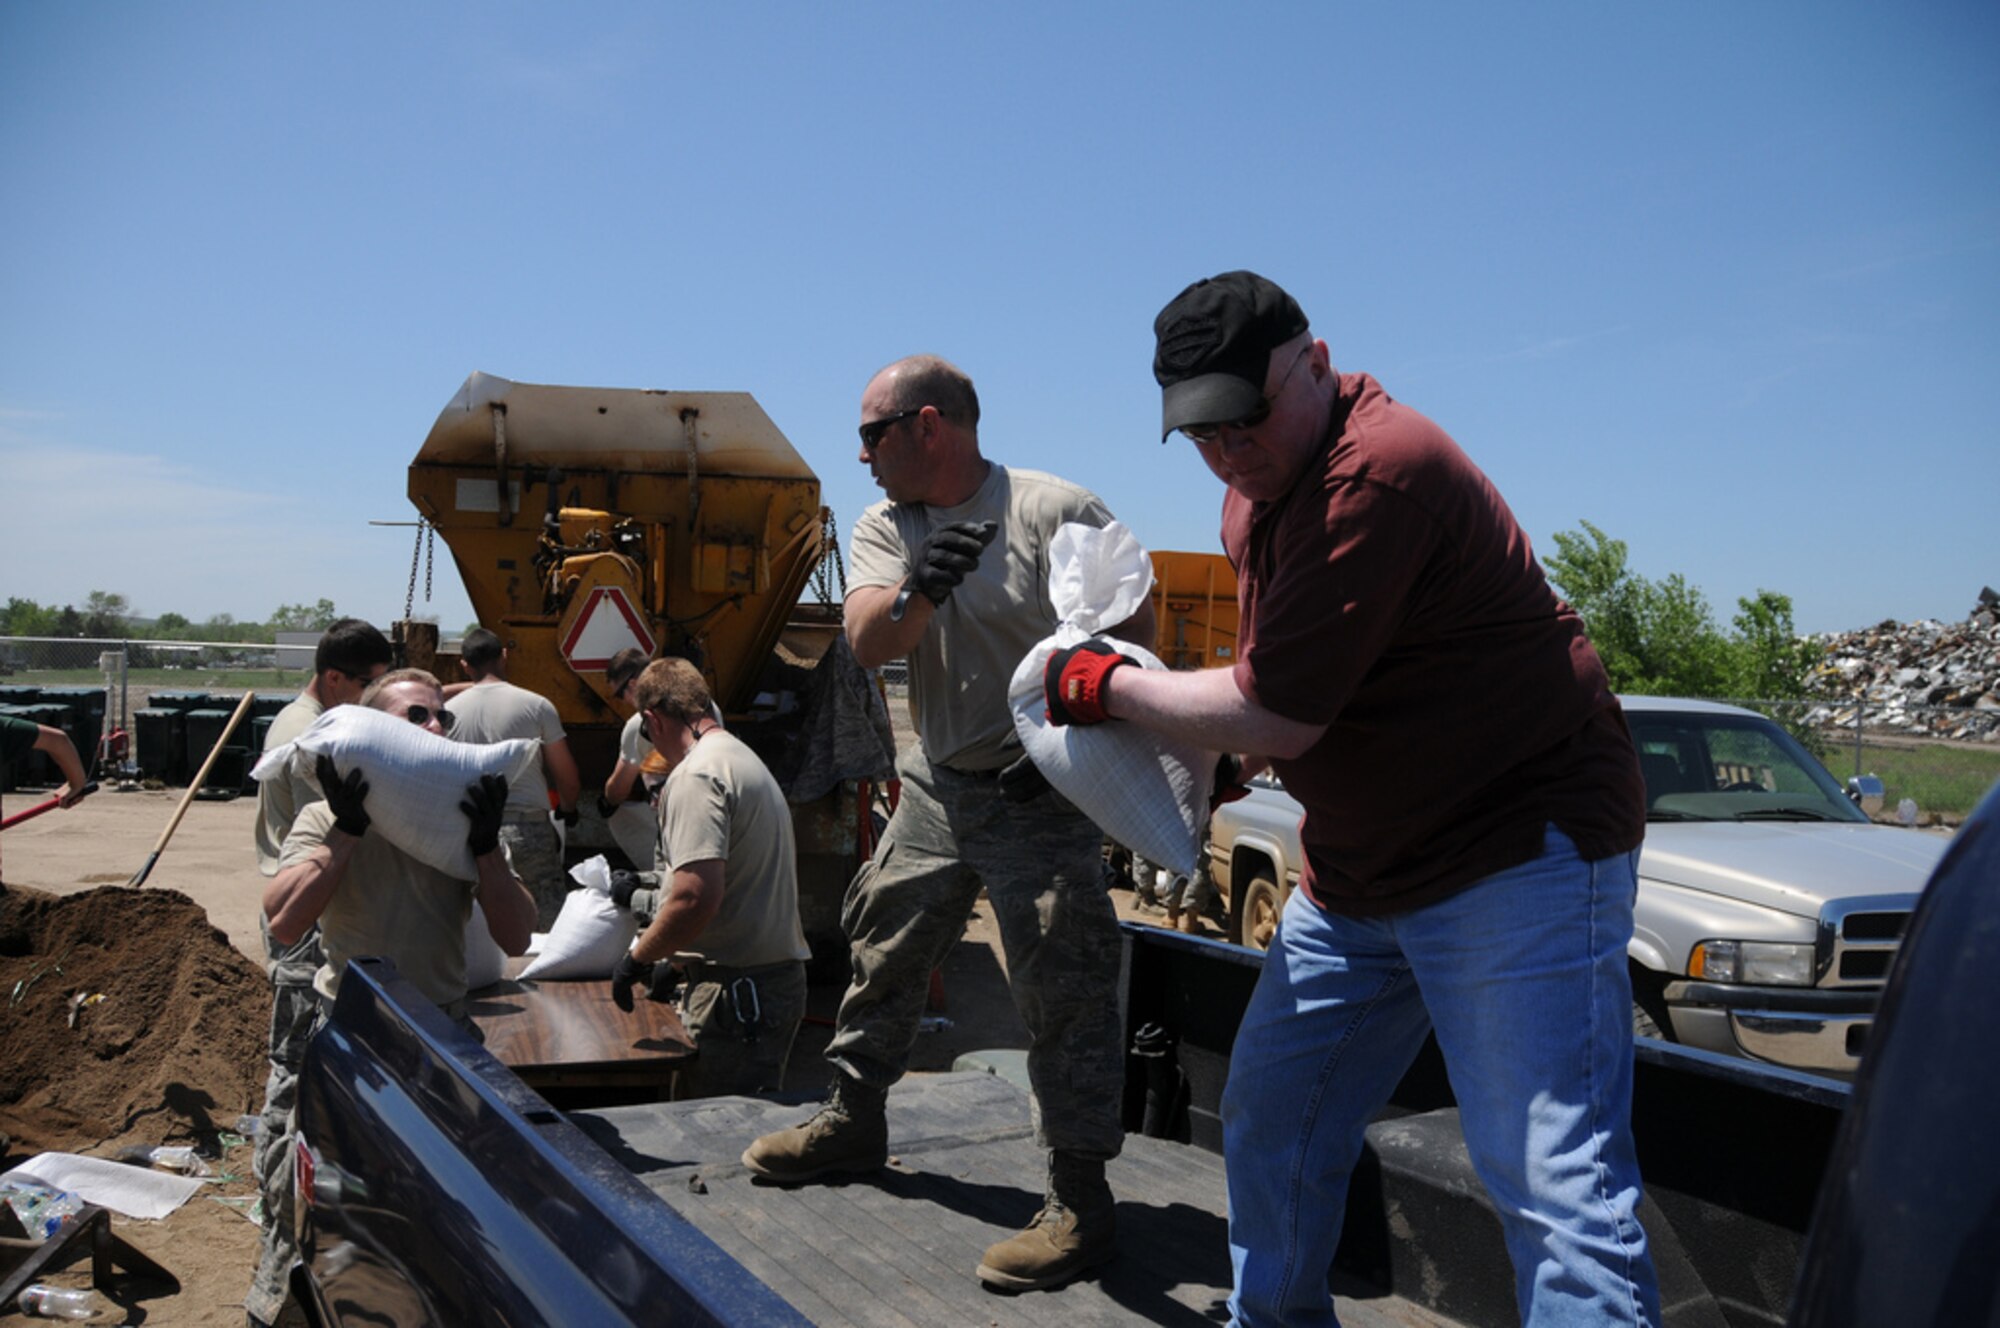 PIERRE, S.D. -- Tech. Sgt. Kevin Elder, a Crew Chief with the 114th Fighter Wing, assists Pierre resident Mark Barnett with another load of sandbags. More than 200 South Dakota Air National Guard Airmen were activated on May 30 as part of an effort to minimize flooding throughout the cities of Pierre and Ft. Pierre, S.D. More than 100 additional Airmen were activated on May 31 to Dakota Dunes, S.D., to assist with flood relief in that area of the state.(SDNG photo by Capt. Michael Frye, 114th Fighter Wing Public Affairs Officer) (RELEASED)
